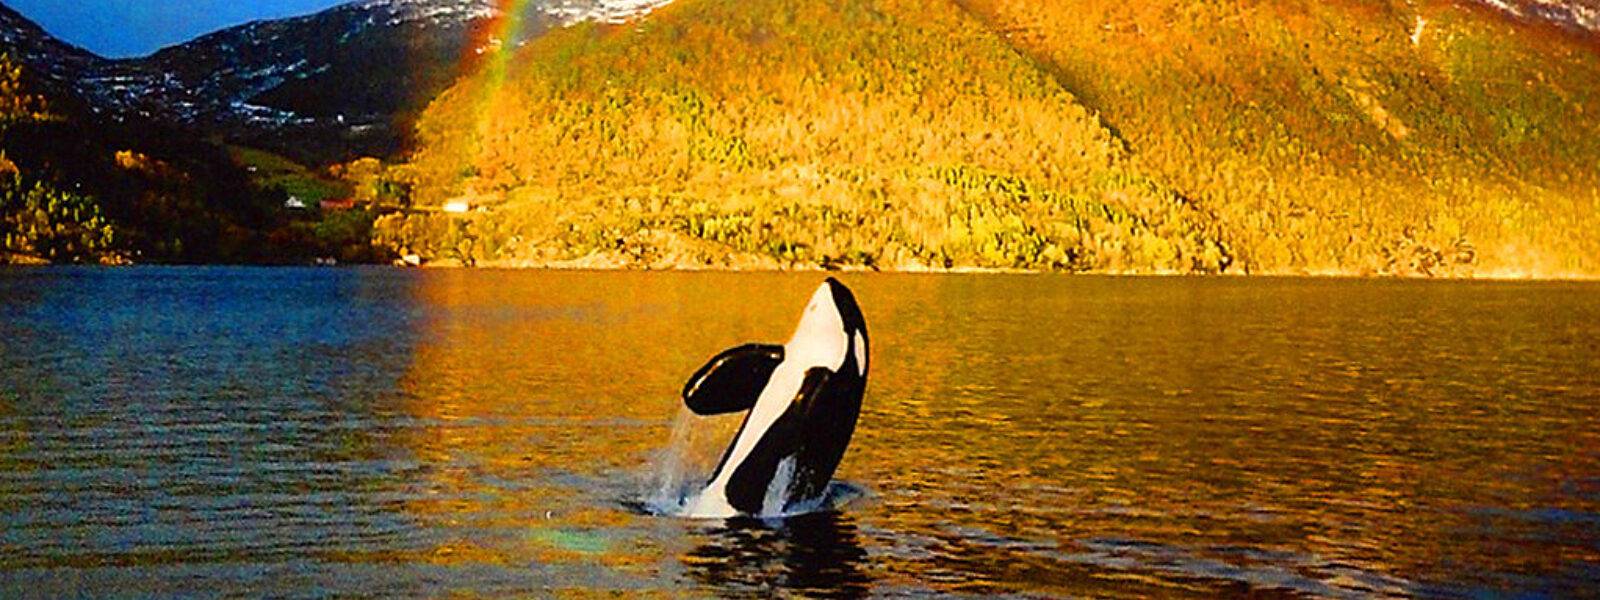 Keiko, Orca Star of Free Willy, in Norway.  Photo Credit: Mark Berman